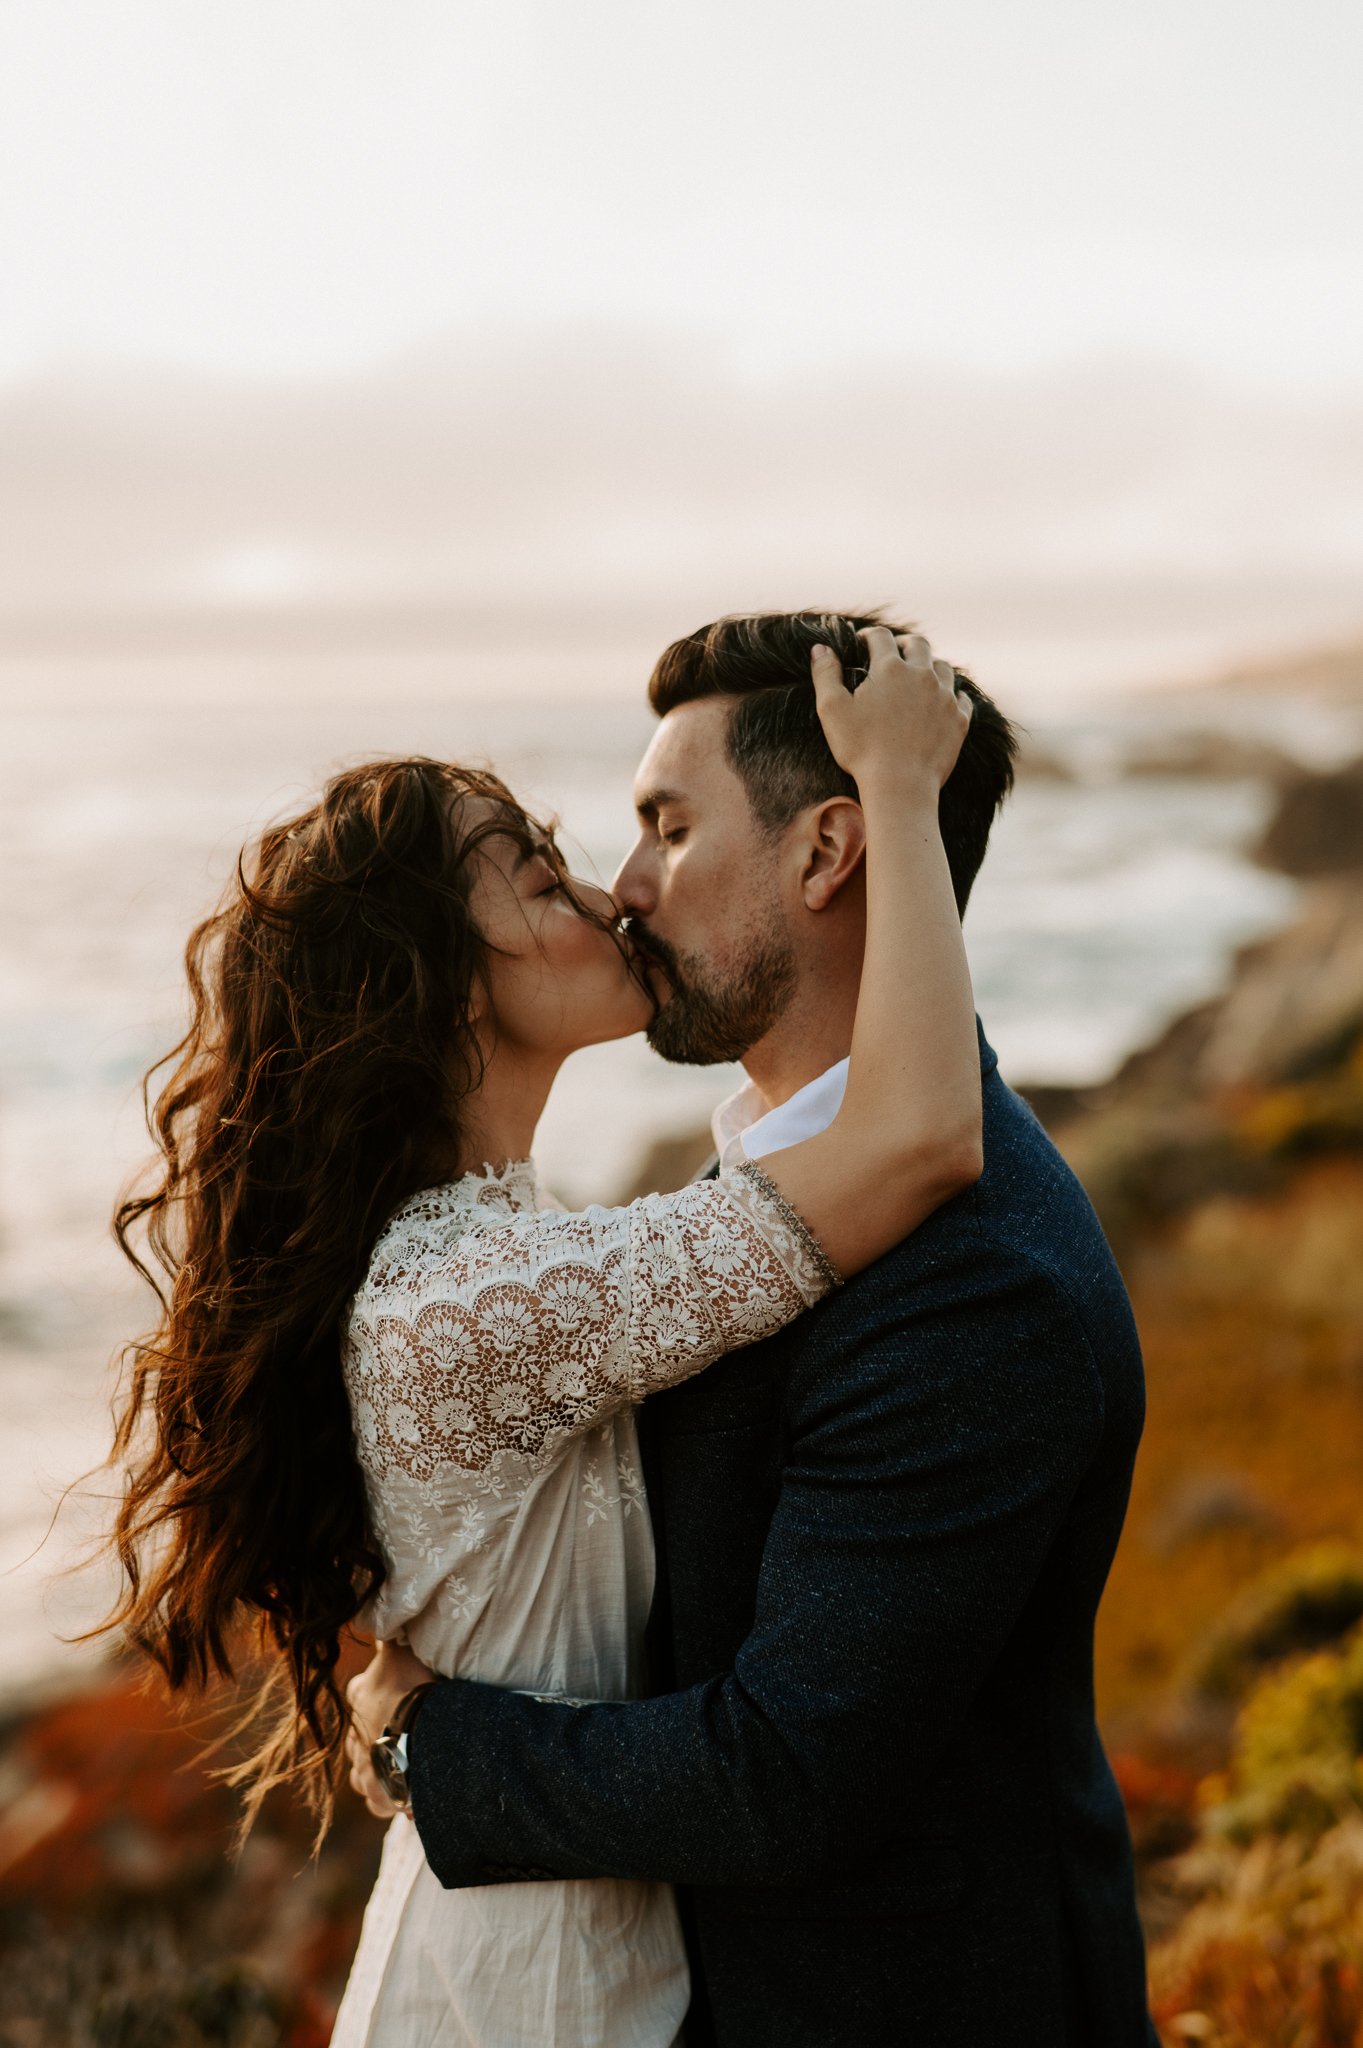 Newly engaged couple upper bodies showing kissing on cliff above Pacific Ocean in background